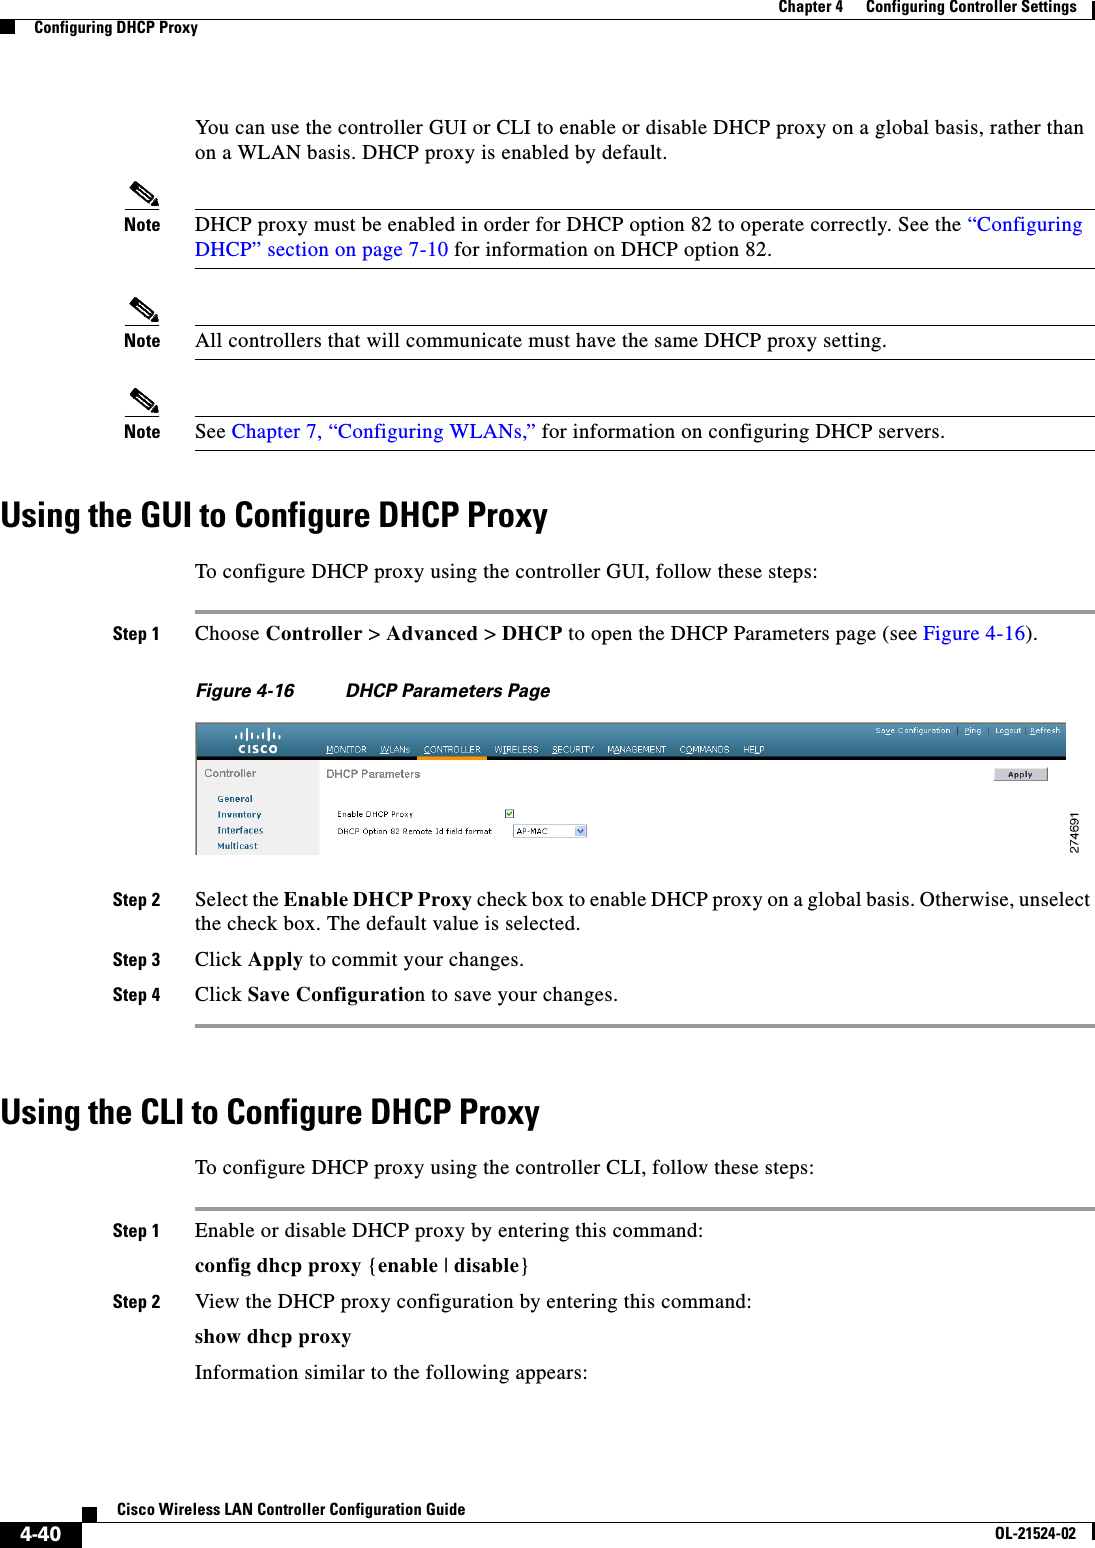  4-40Cisco Wireless LAN Controller Configuration GuideOL-21524-02Chapter 4      Configuring Controller SettingsConfiguring DHCP ProxyYou can use the controller GUI or CLI to enable or disable DHCP proxy on a global basis, rather than on a WLAN basis. DHCP proxy is enabled by default.Note DHCP proxy must be enabled in order for DHCP option 82 to operate correctly. See the “Configuring DHCP” section on page 7-10 for information on DHCP option 82.Note All controllers that will communicate must have the same DHCP proxy setting.Note See Chapter 7, “Configuring WLANs,” for information on configuring DHCP servers.Using the GUI to Configure DHCP ProxyTo configure DHCP proxy using the controller GUI, follow these steps:Step 1 Choose Controller &gt; Advanced &gt; DHCP to open the DHCP Parameters page (see Figure 4-16).Figure 4-16 DHCP Parameters PageStep 2 Select the Enable DHCP Proxy check box to enable DHCP proxy on a global basis. Otherwise, unselect the check box. The default value is selected.Step 3 Click Apply to commit your changes.Step 4 Click Save Configuration to save your changes.Using the CLI to Configure DHCP ProxyTo configure DHCP proxy using the controller CLI, follow these steps:Step 1 Enable or disable DHCP proxy by entering this command:config dhcp proxy {enable | disable}Step 2 View the DHCP proxy configuration by entering this command:show dhcp proxyInformation similar to the following appears: